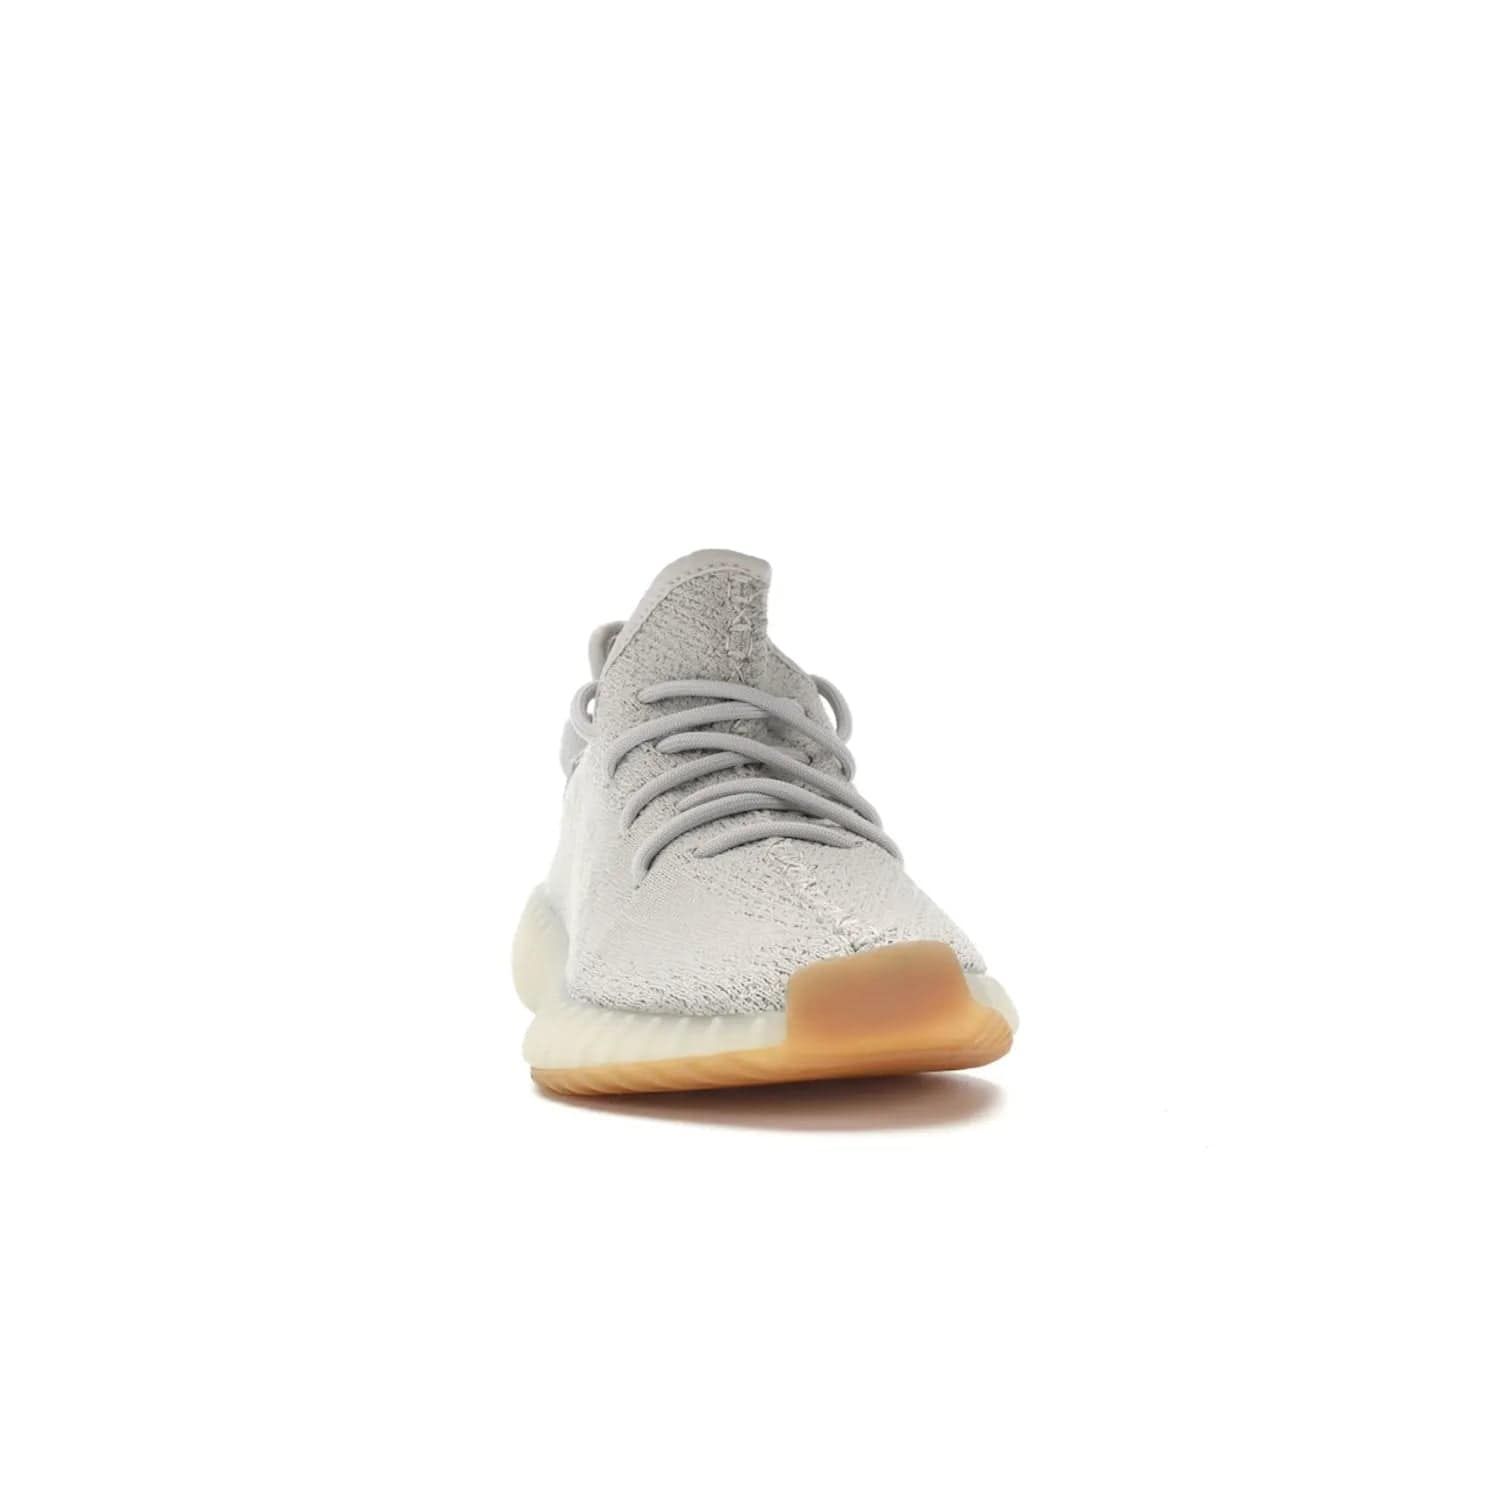 adidas Yeezy Boost 350 V2 Sesame - Image 9 - Only at www.BallersClubKickz.com - Introducing the adidas Yeezy Boost 350 V2 Sesame. Featuring a sesame upper, midsole and gum sole for a sleek silhouette. Cop the stylish sneaker released in November 2018.